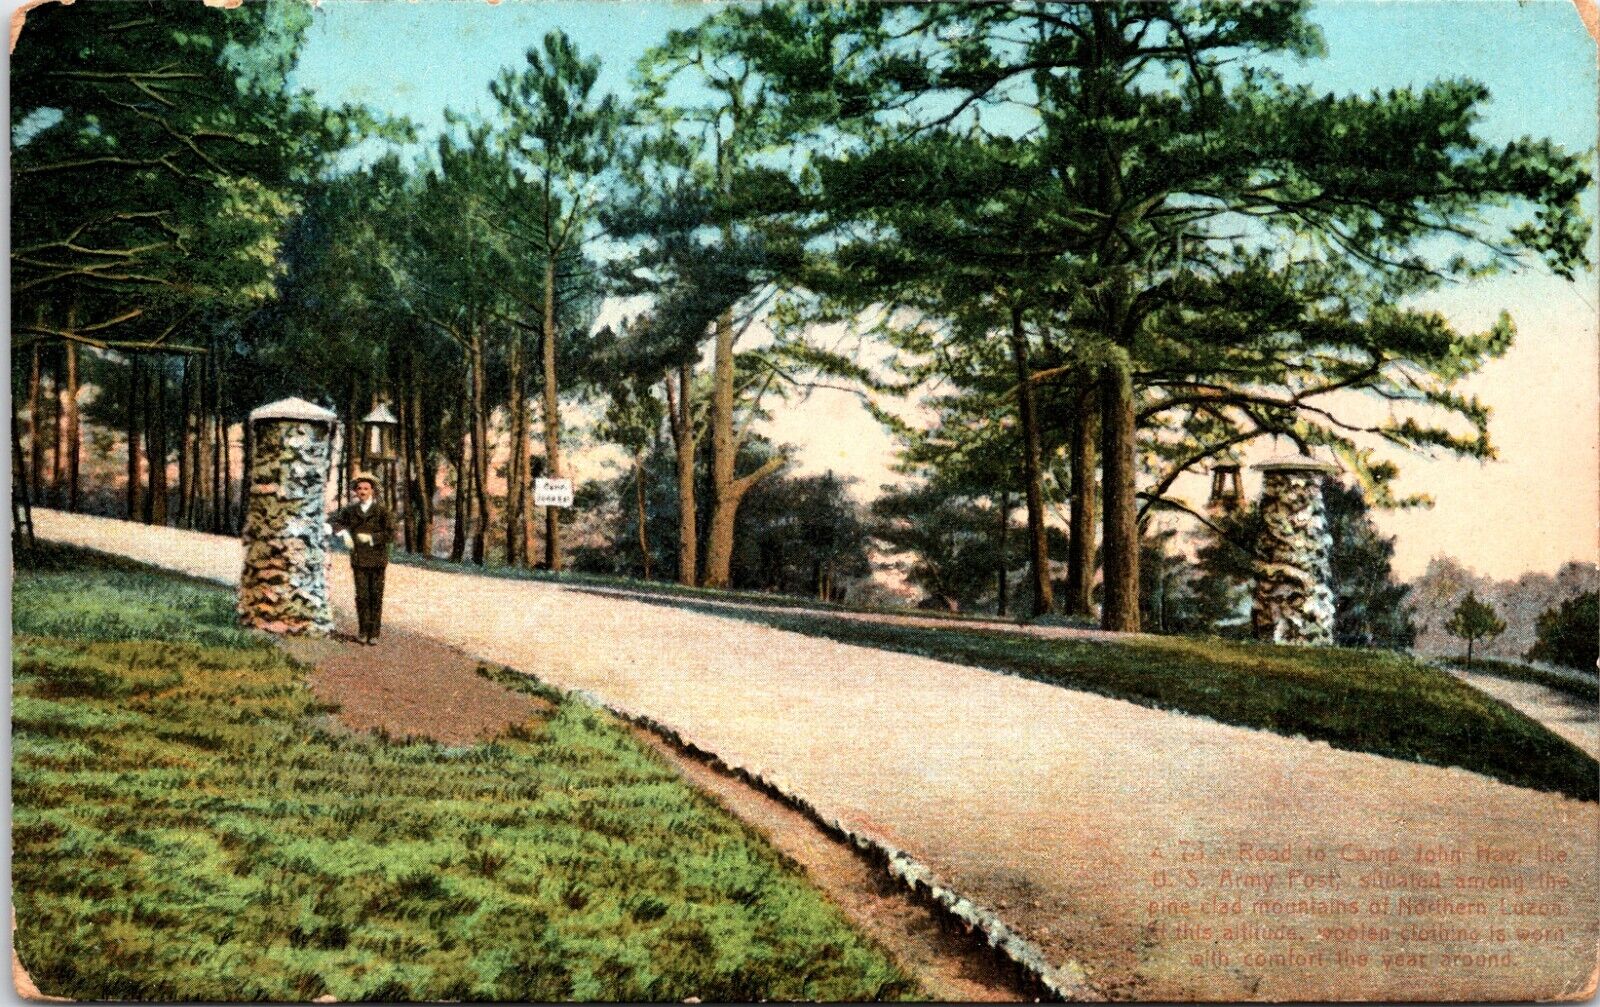 Road to Camp John Hay U.S. Army Post Baguio City Philippines Postcard